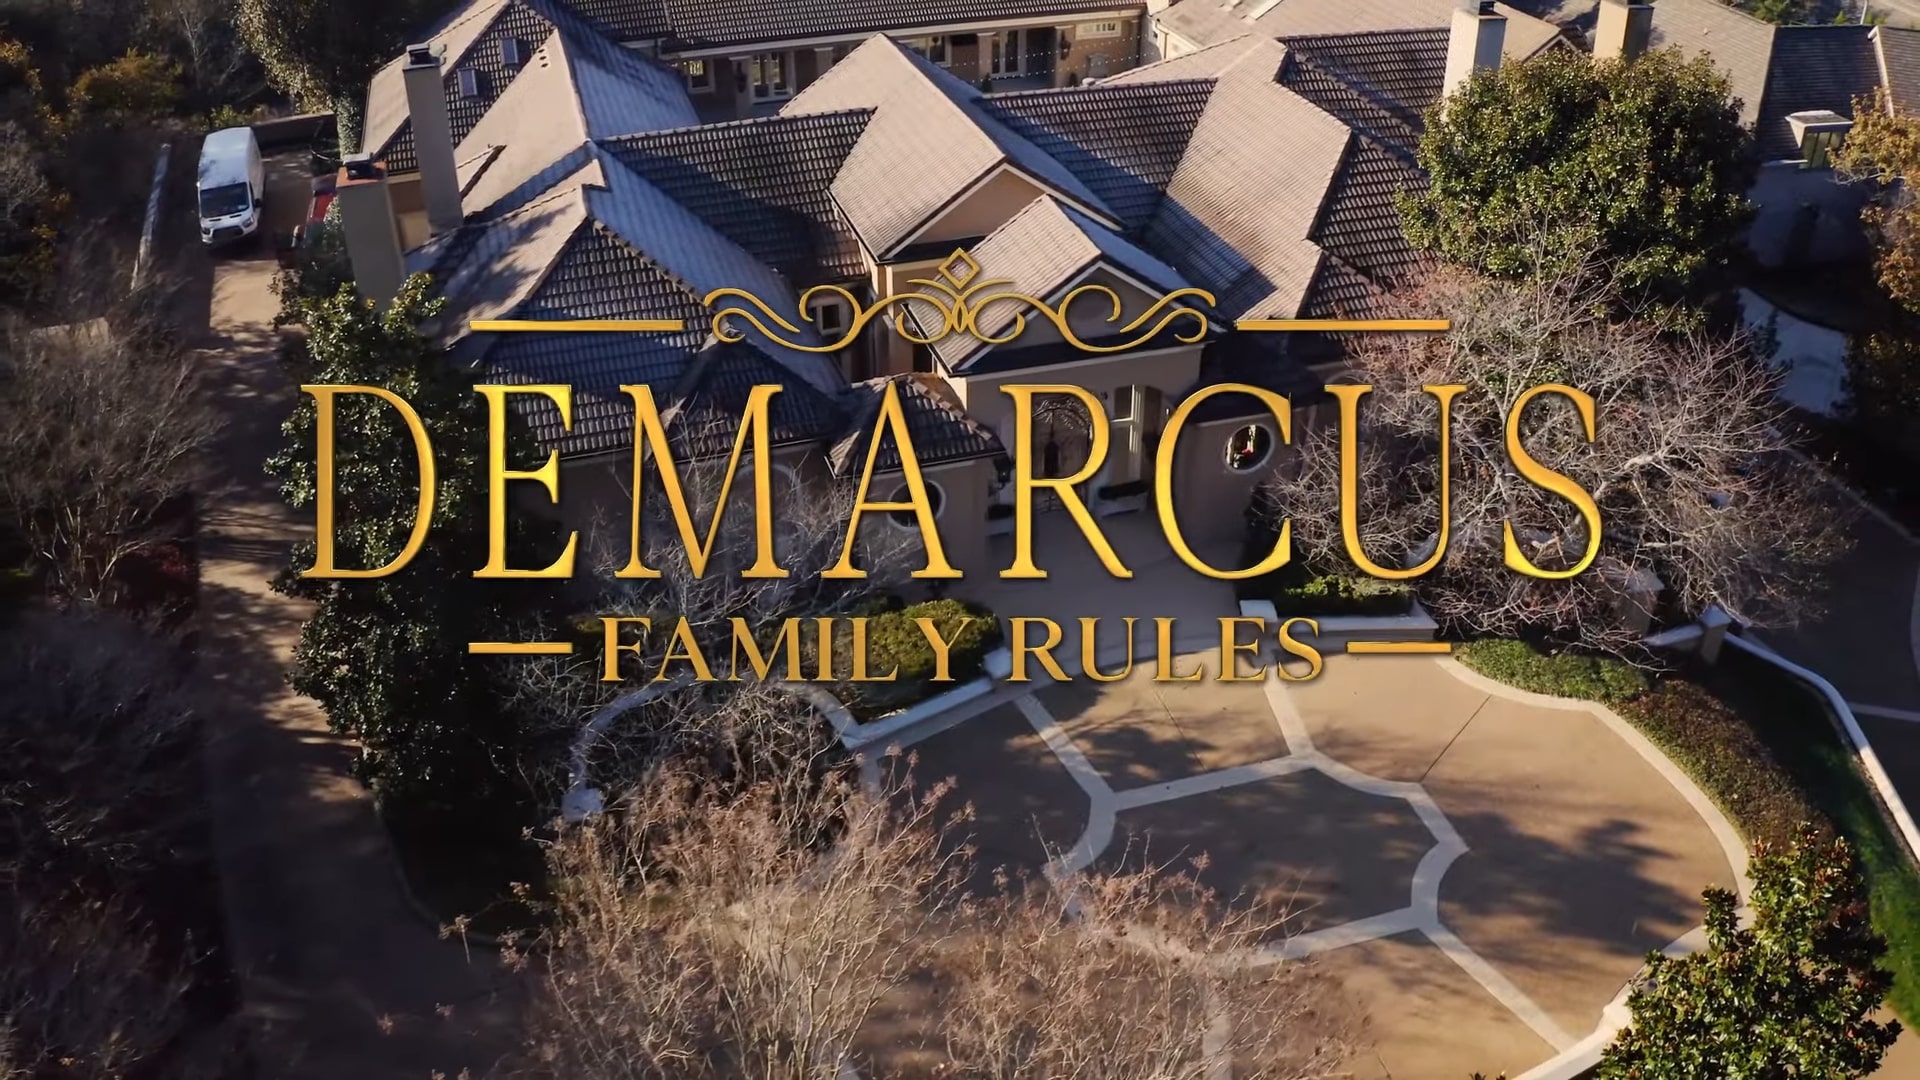 Netflix Demarcus Family Rules Trailer, Netflix Reality Shows, Netflix Music Shows, Coming to Netflix in August 2020